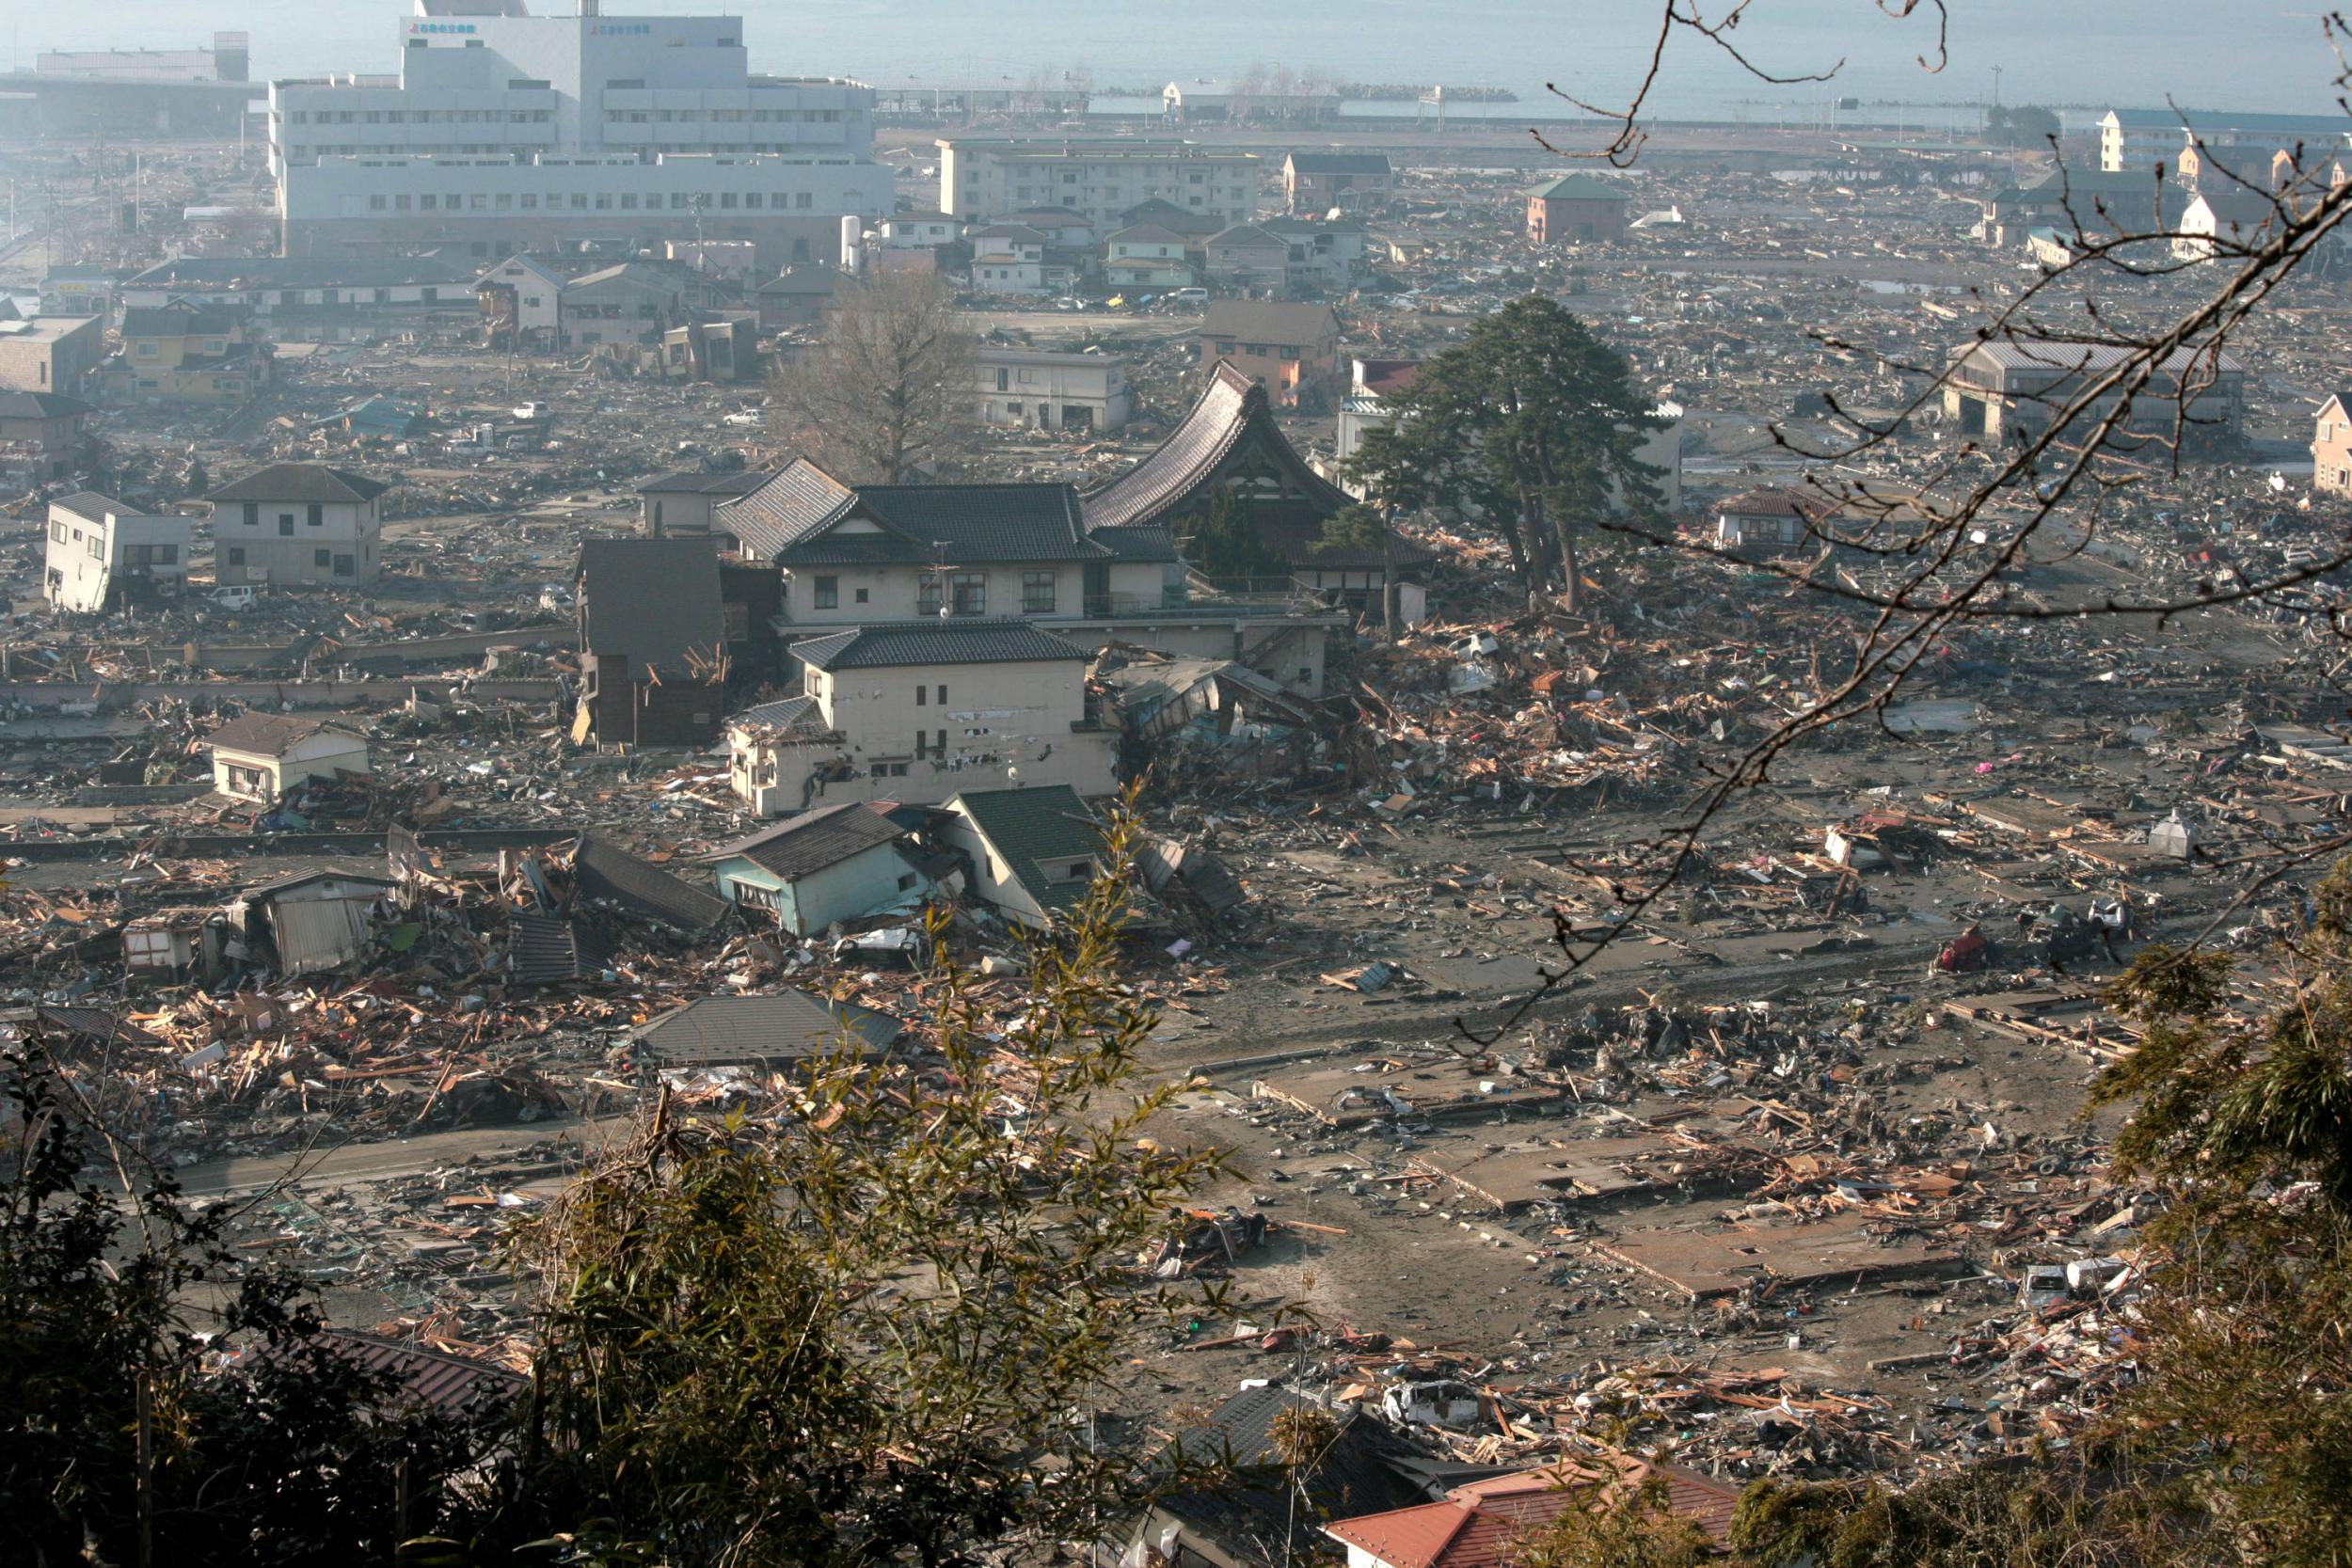 Entire city of Otsuchi was laid to waste in the tsunami that triggered the Fukushima meltdown